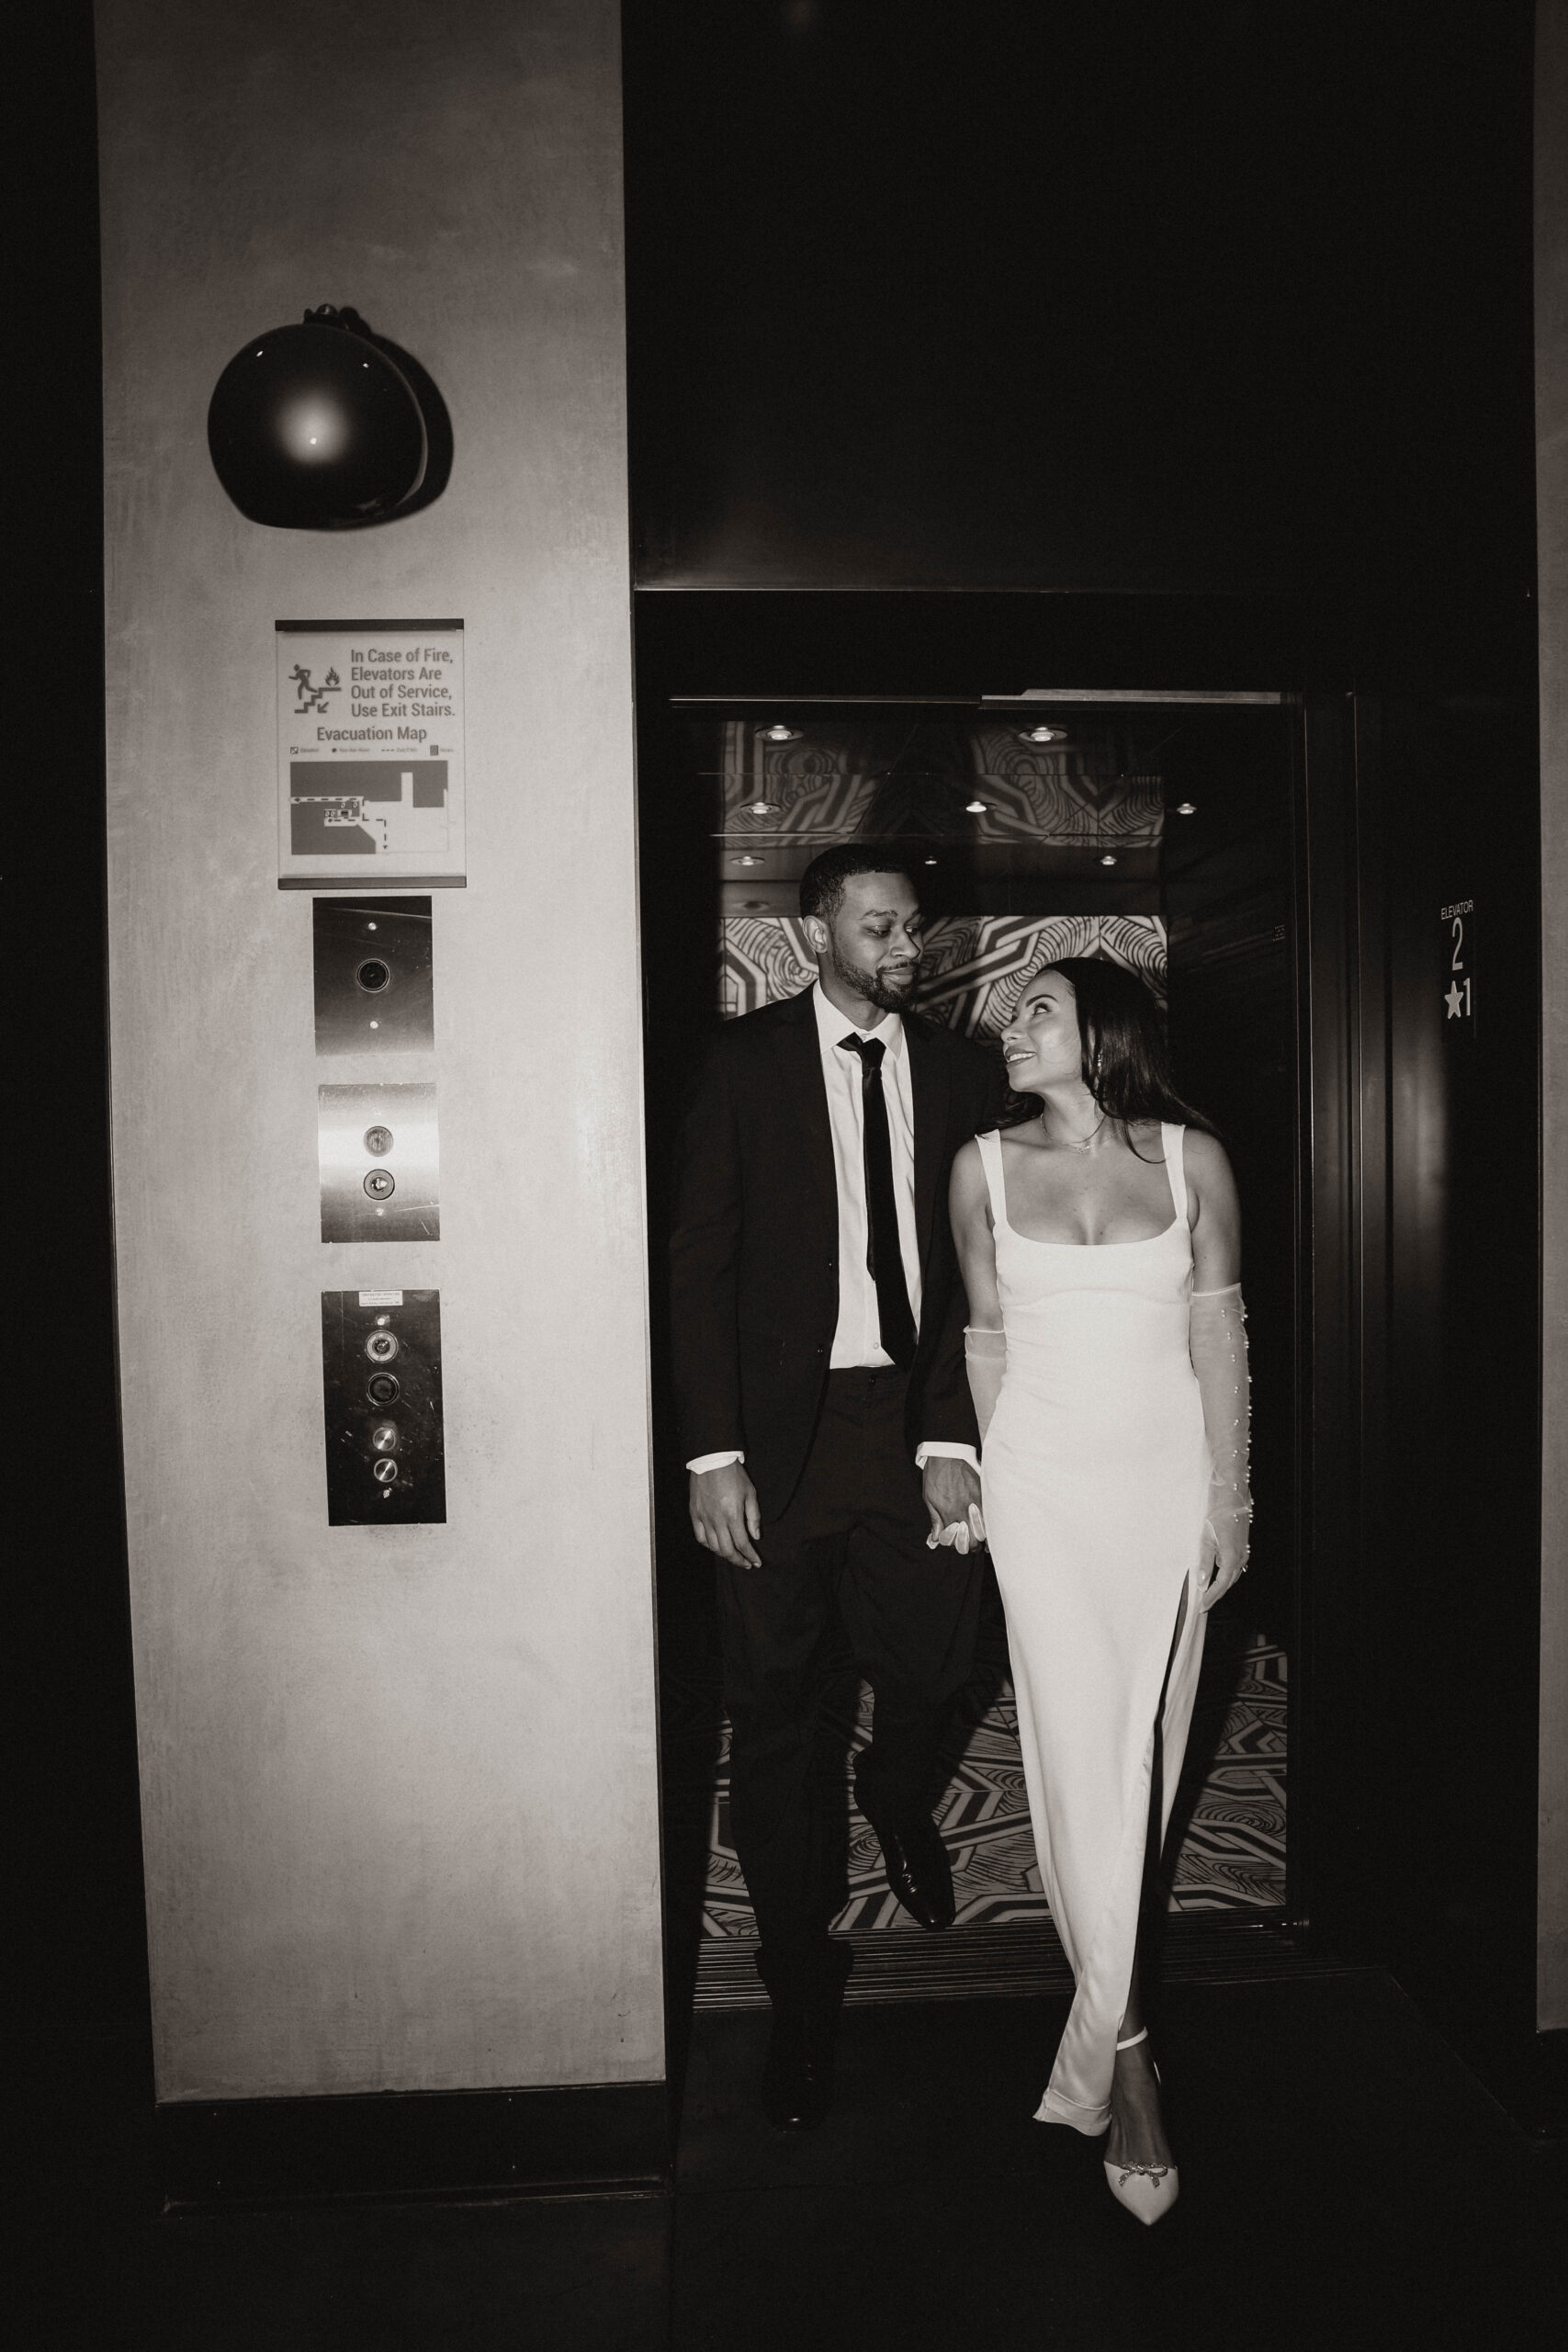 newly engaged couple walking out of an elevator expressing their unique engagement shoot ideas